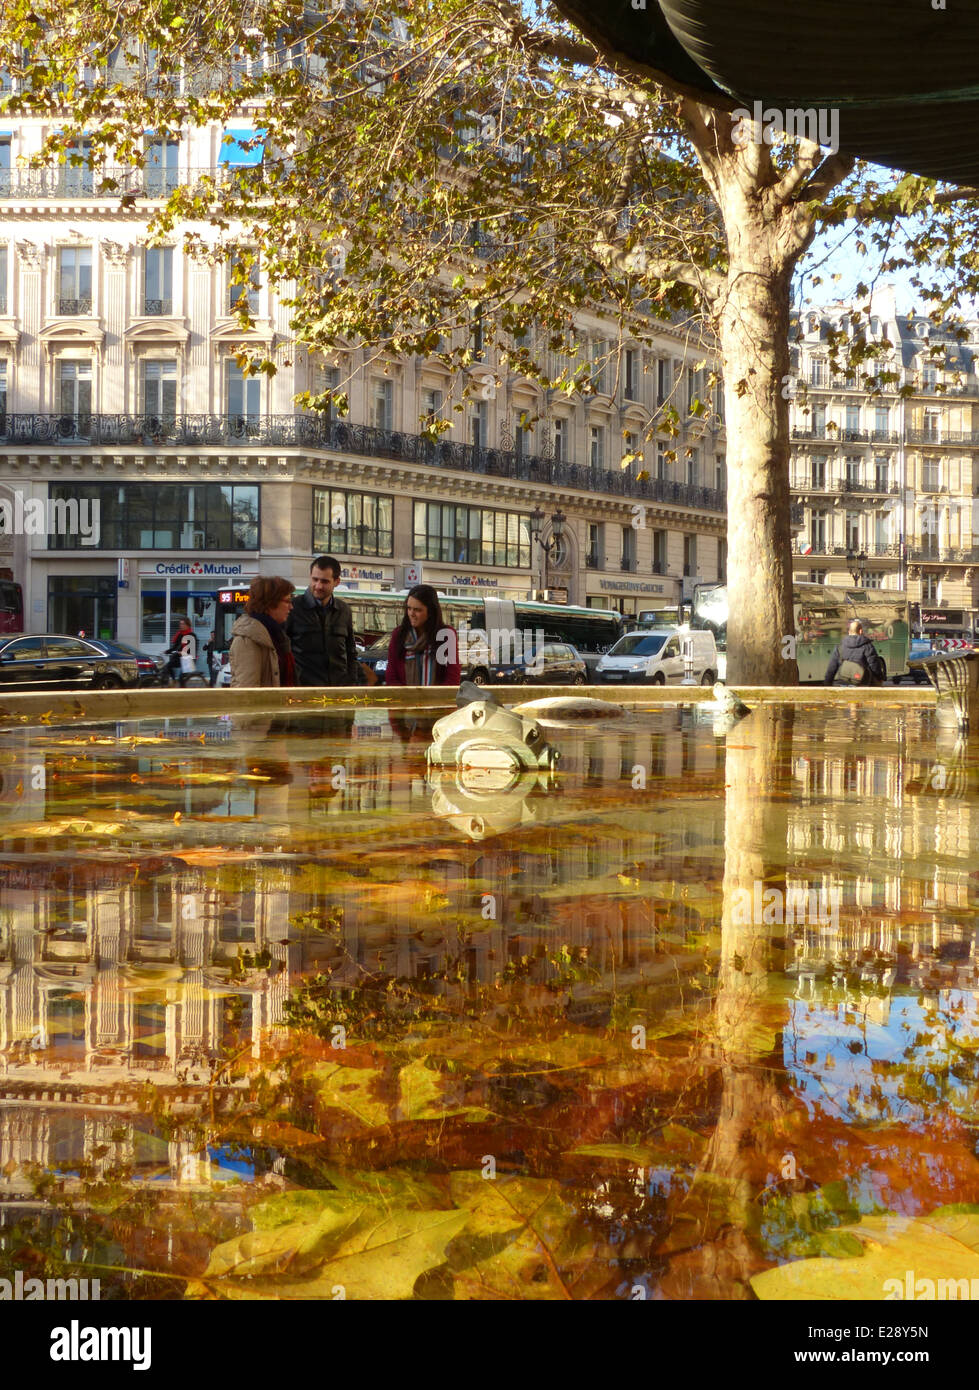 A Paris street scene with a pond in the foreground and people chatting Stock Photo